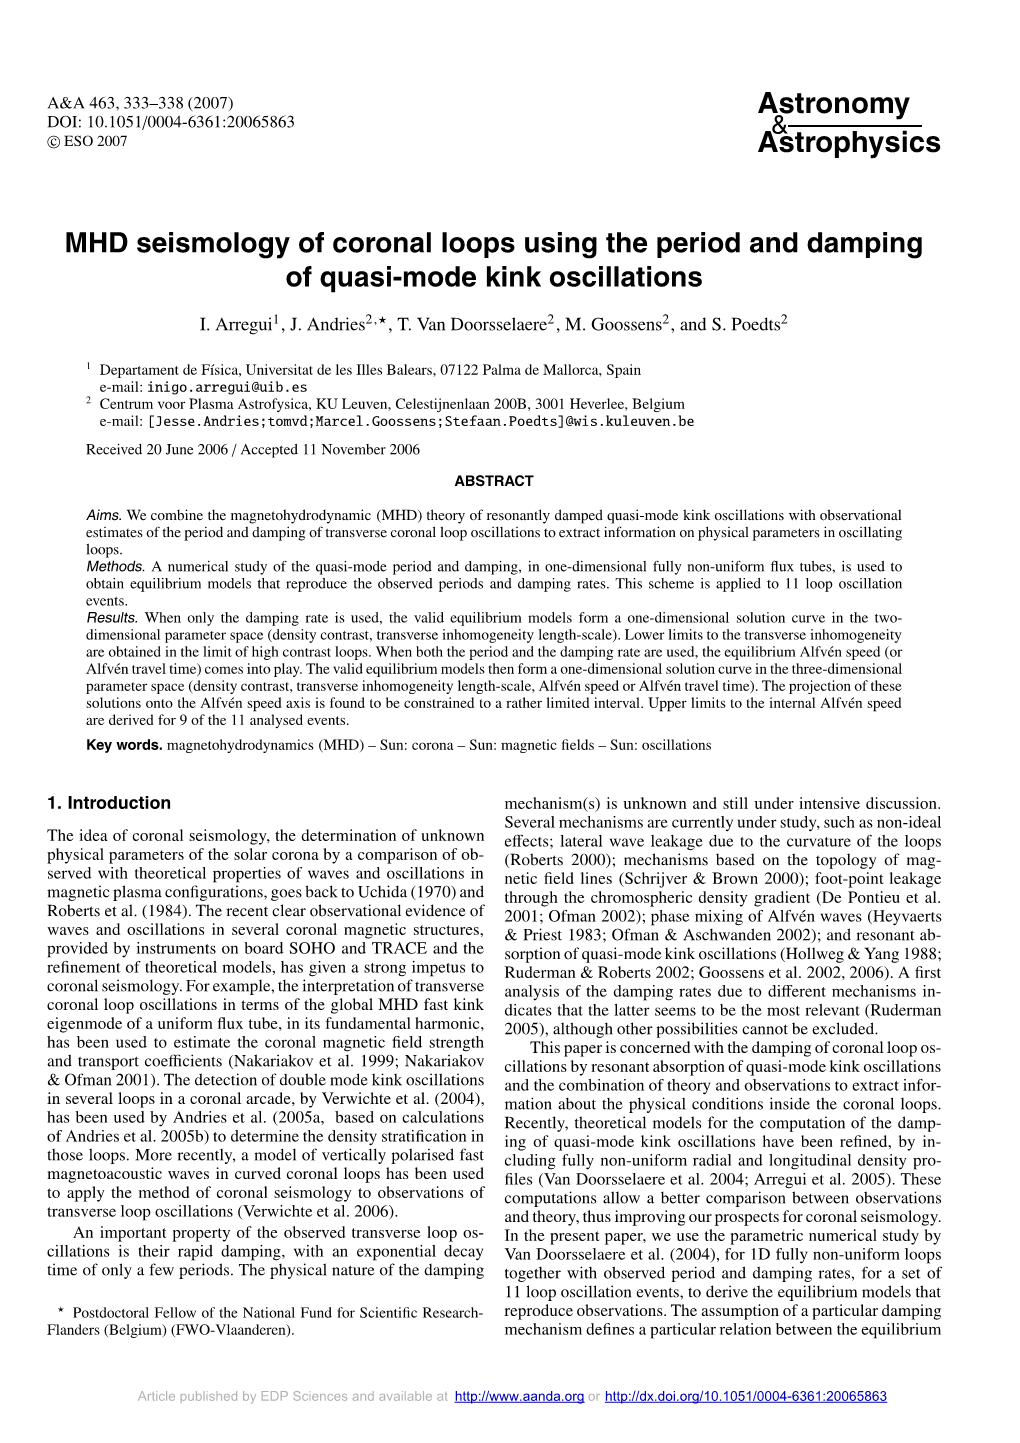 MHD Seismology of Coronal Loops Using the Period and Damping of Quasi-Mode Kink Oscillations